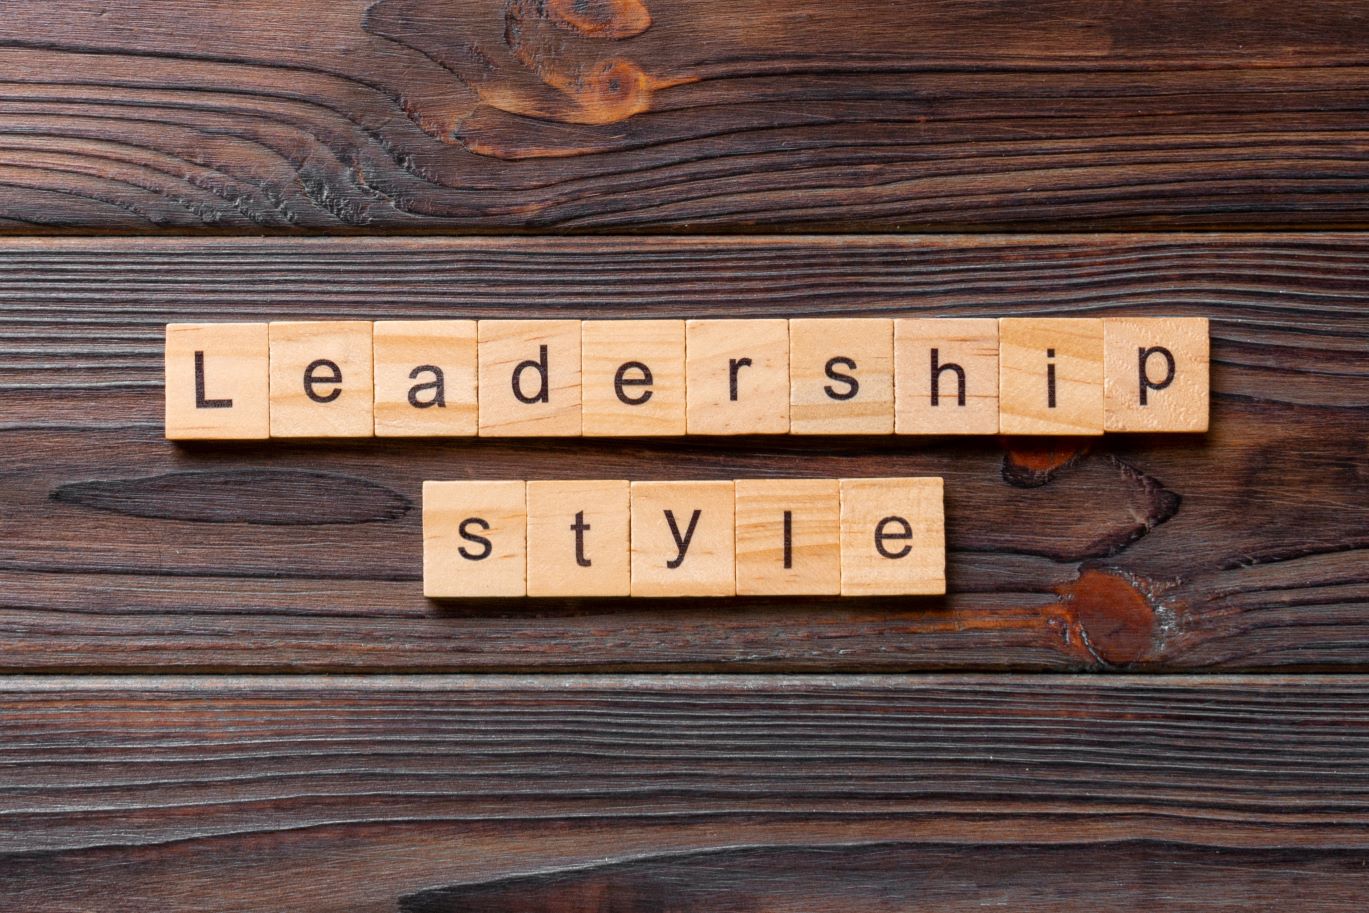 What is leadership style? Should multiple leadership styles be flexible?